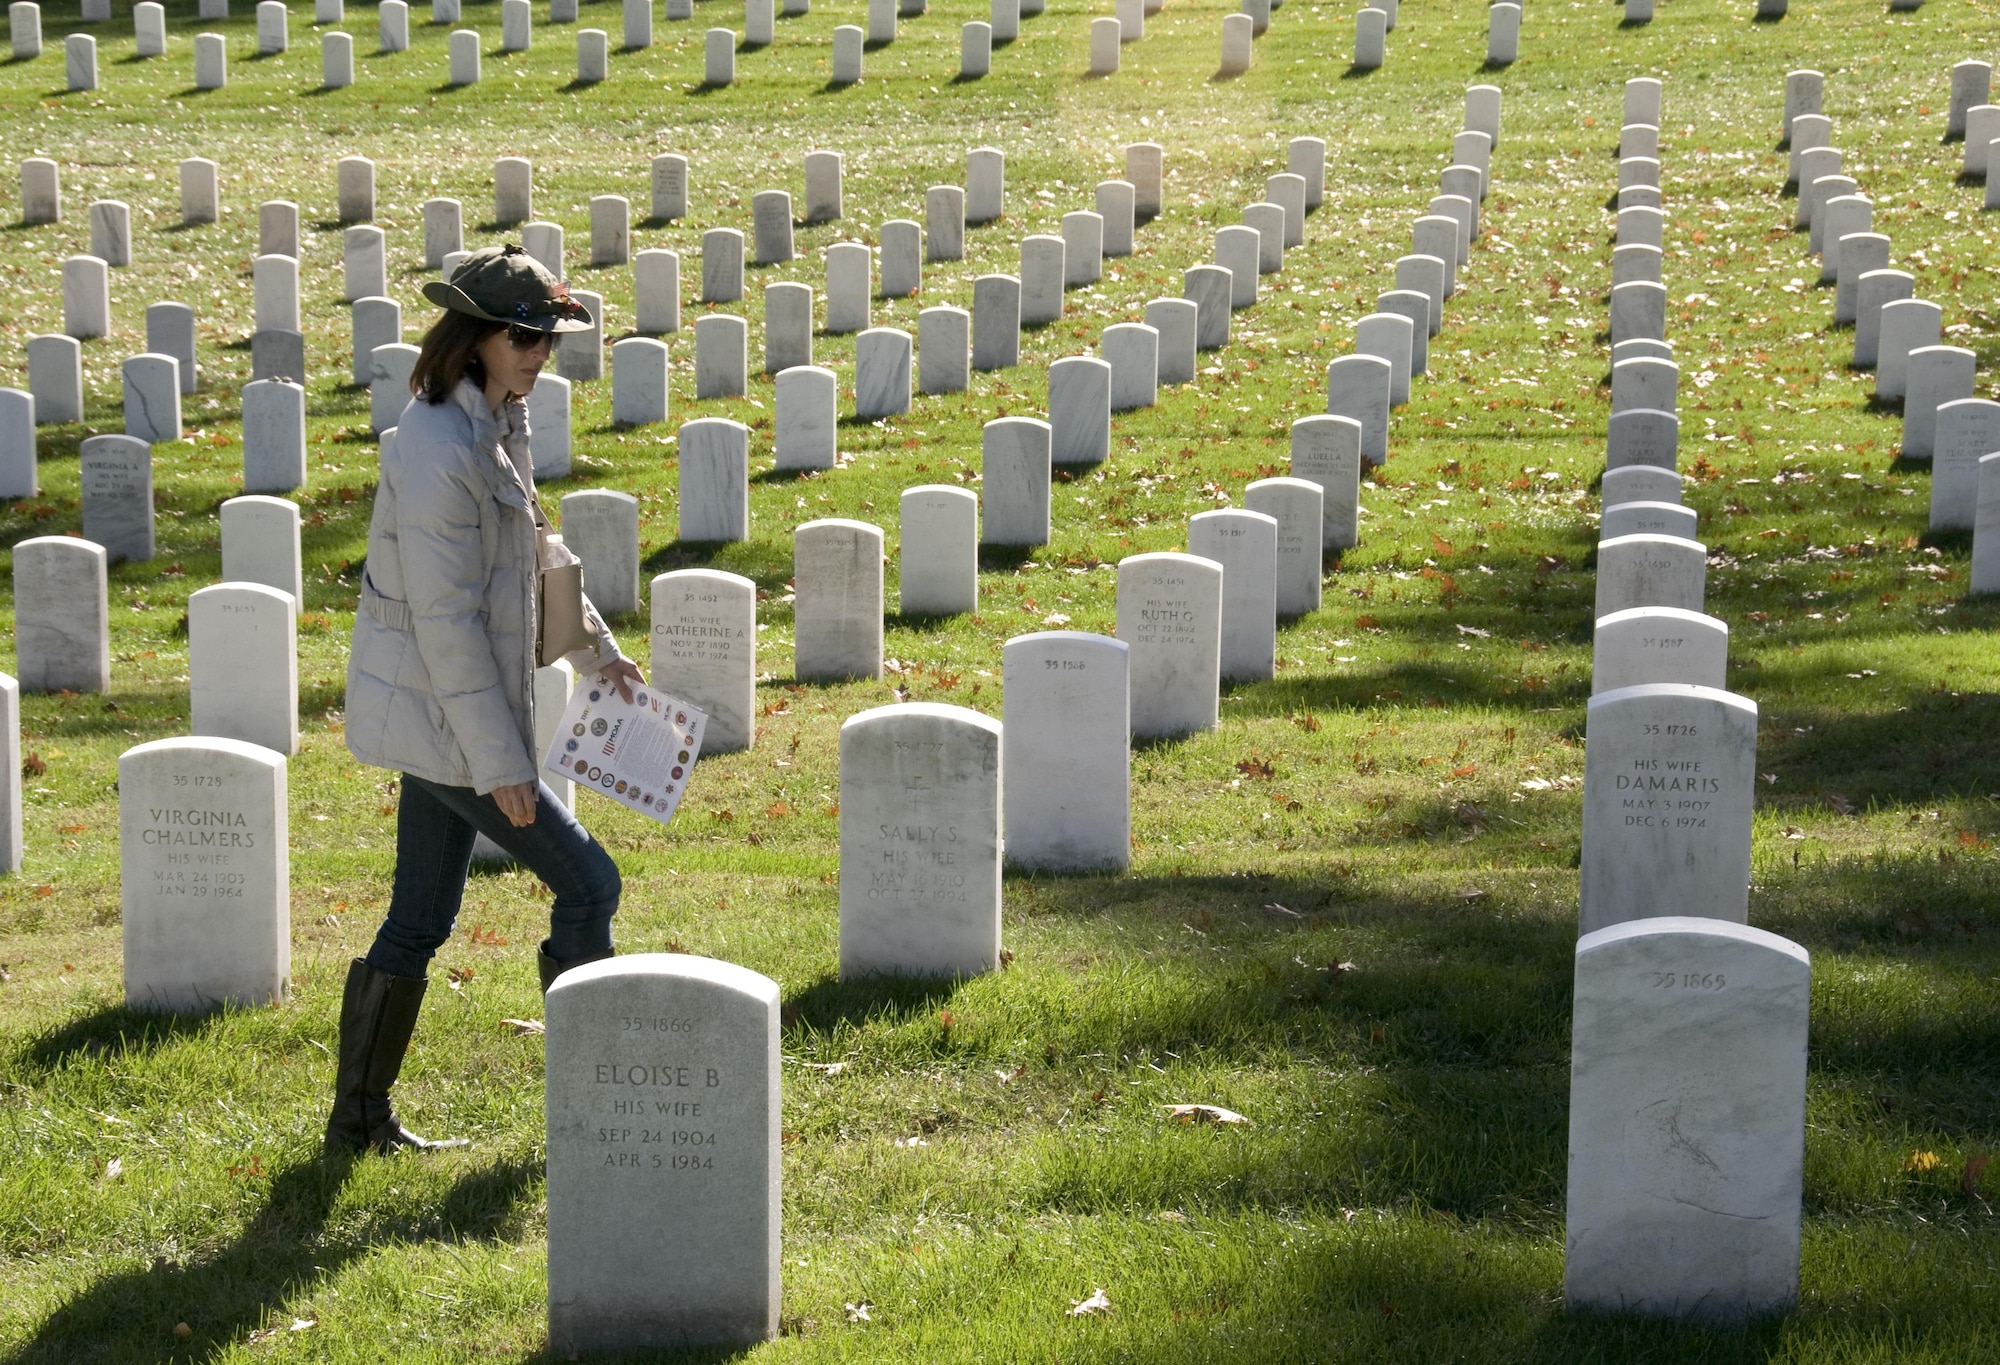 Laura Fortuna-Long reads the inscriptions on tombstones at the Arlington National Cemetery in Arlington, Va., on Nov. 11, 2015. (U.S. Air Force photo/Sean Kimmons)